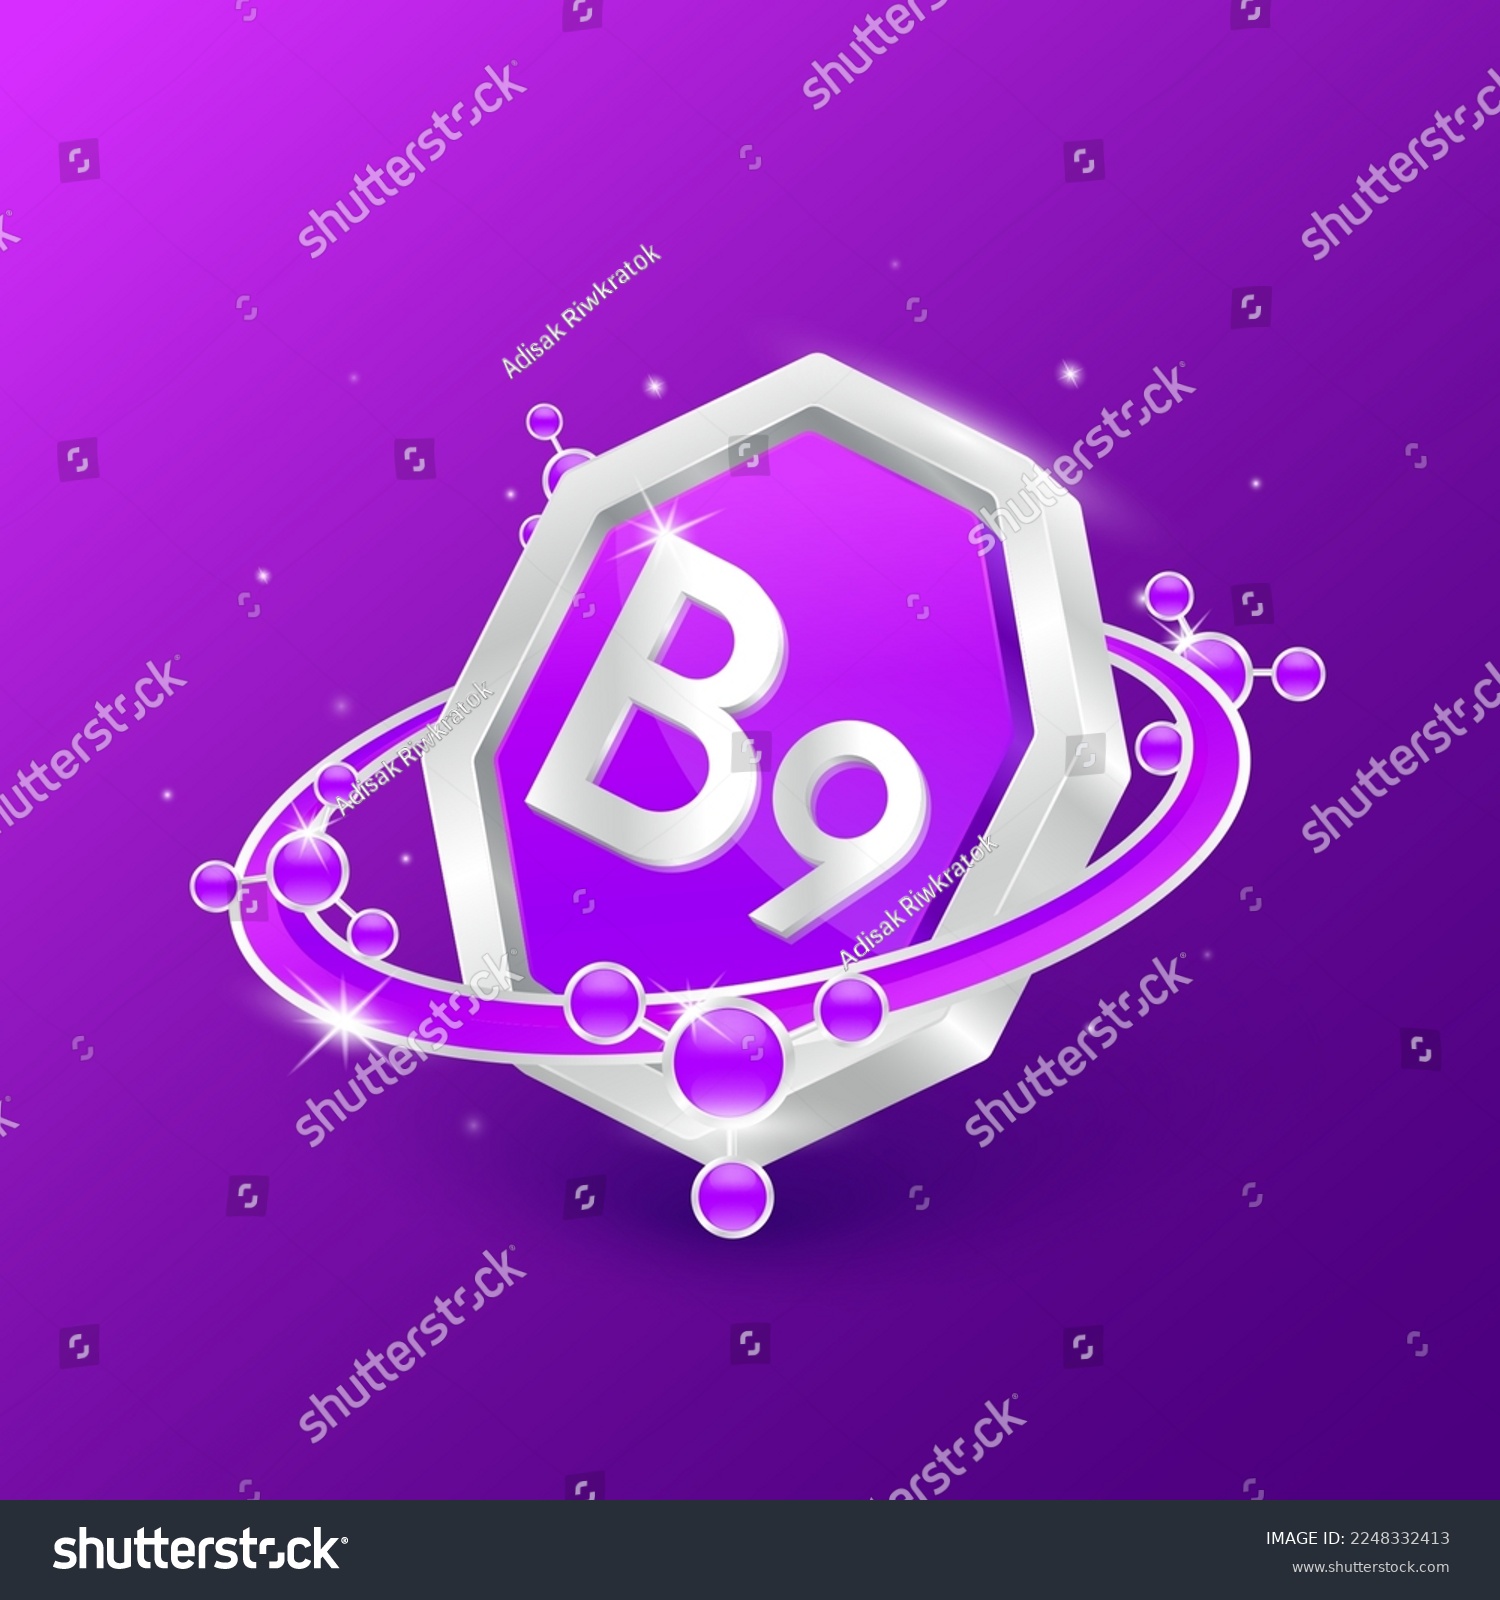 Logo label nutrition 3D silver. Vitamin B9 in octagon purple shape and atom orbit around. Used for products food design. Protect your body keep healthy. Medical concepts. Isolated Vector EPS10. #2248332413